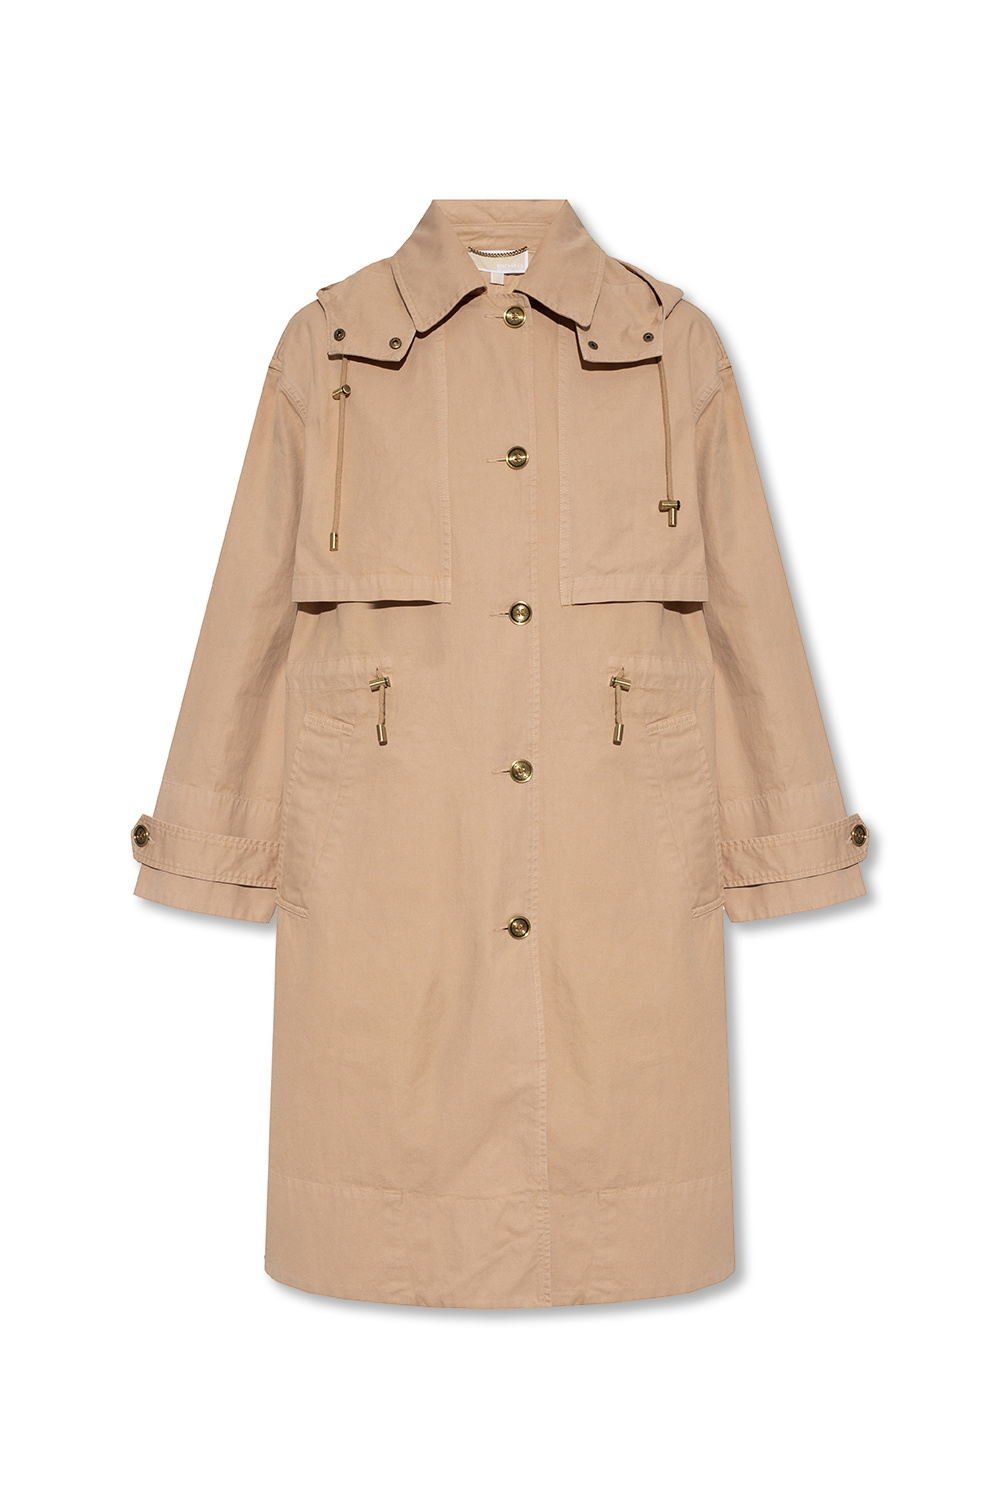 Michael Kors Womens Belted Hooded Trench Coat  The Shops at Willow Bend